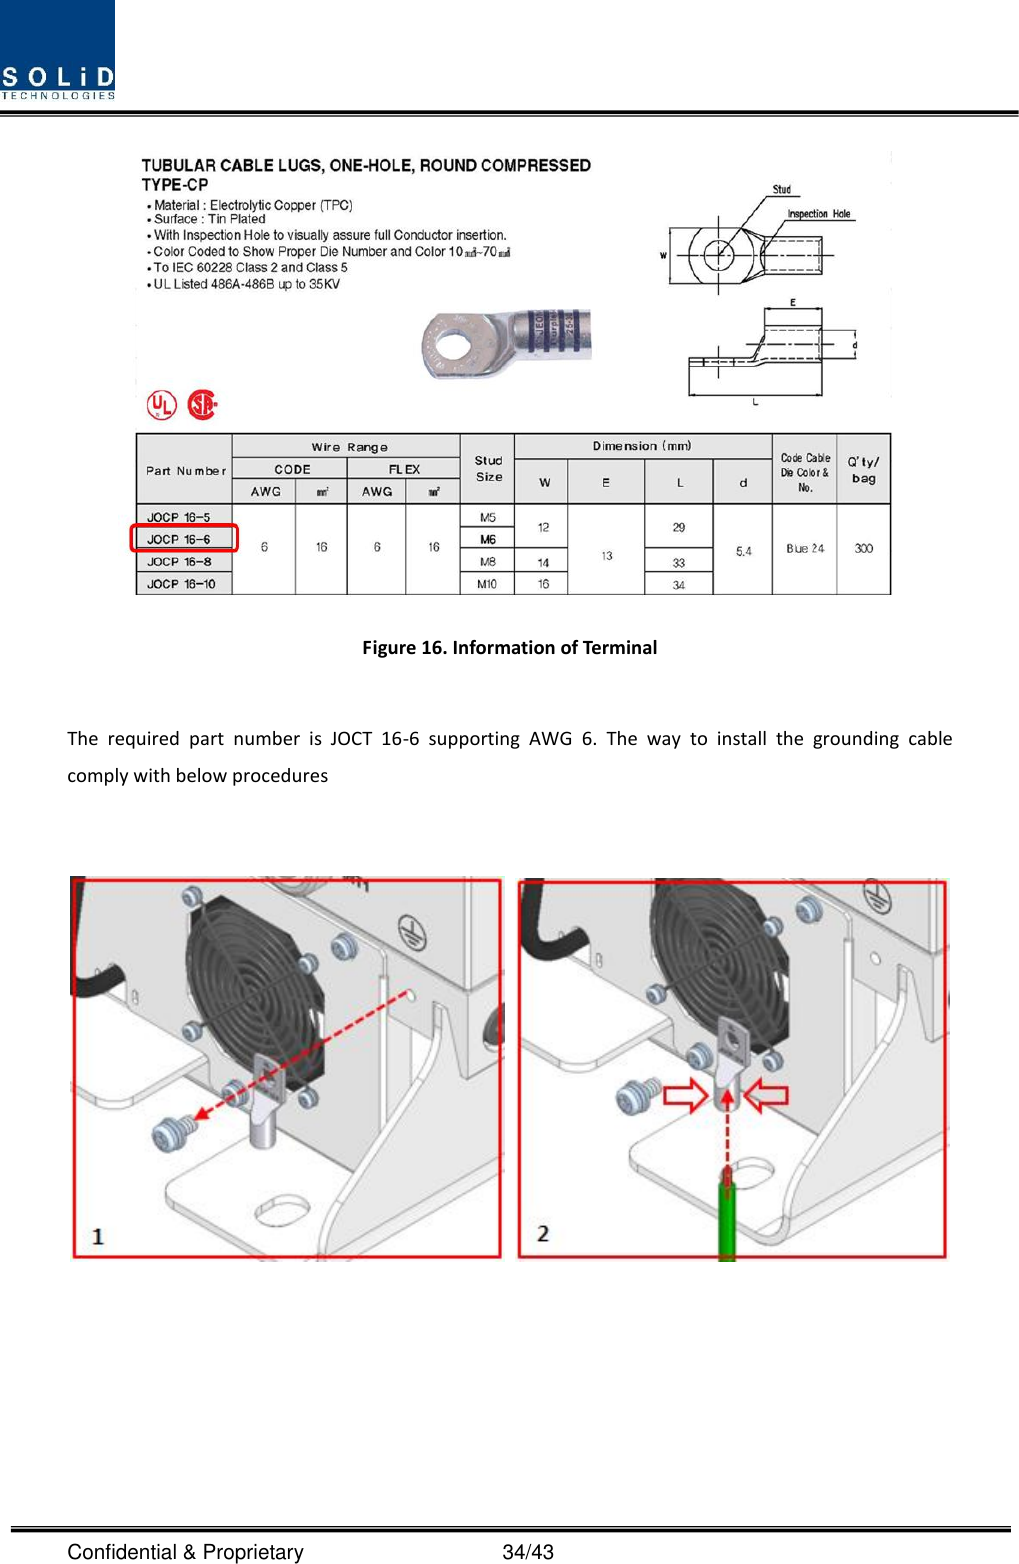  Confidential &amp; Proprietary                                      34/43  Figure 16. Information of Terminal  The  required  part  number  is  JOCT  16-6  supporting  AWG  6.  The  way  to  install  the  grounding  cable comply with below procedures     